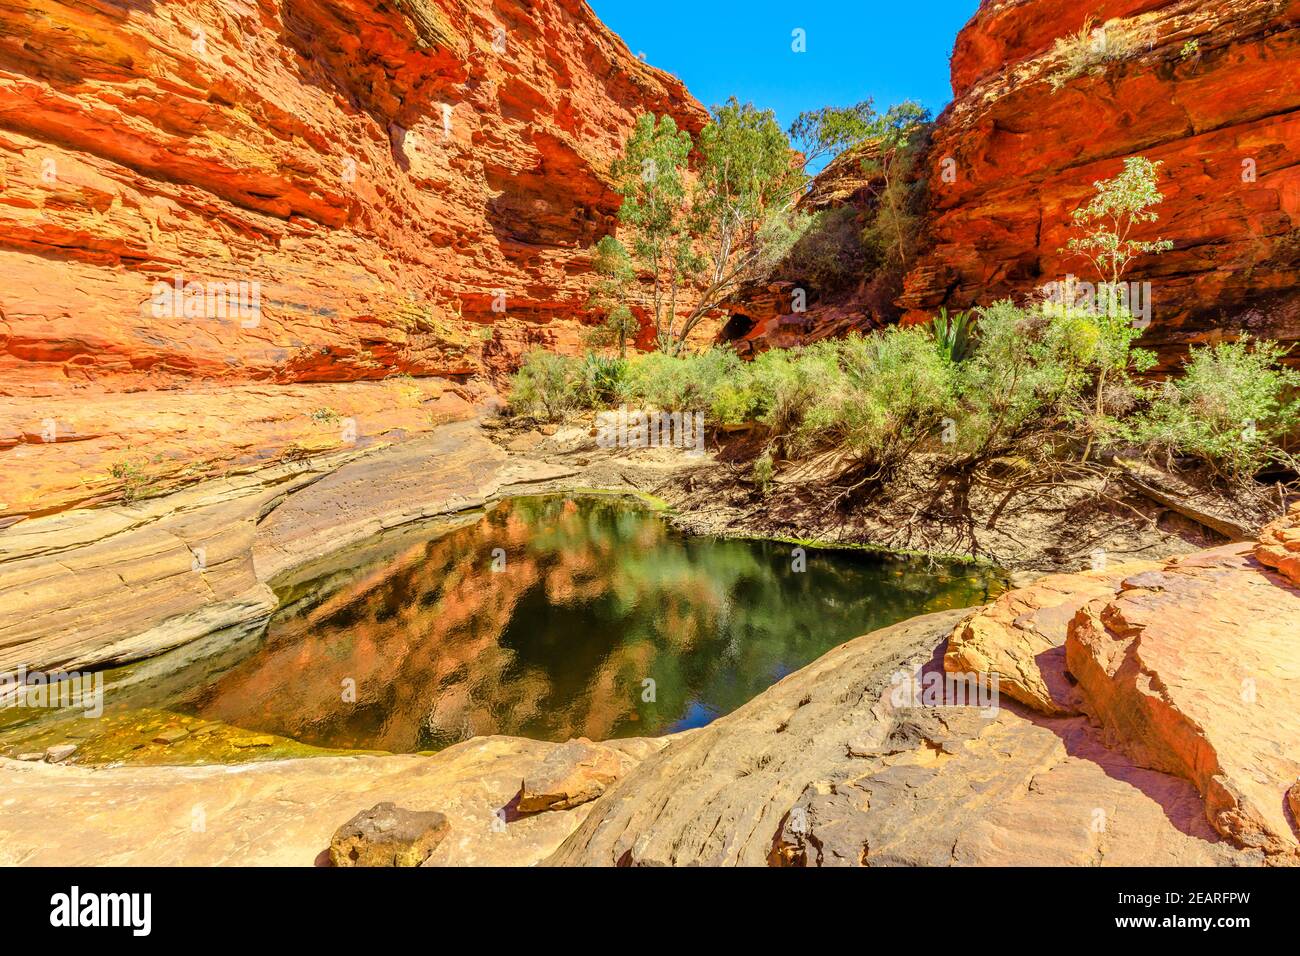 Scenic landscape of waterhole in Garden of Eden, Kings Canyon in Watarrka National Park. Natural pool is a refuge for many plants and animals Stock Photo